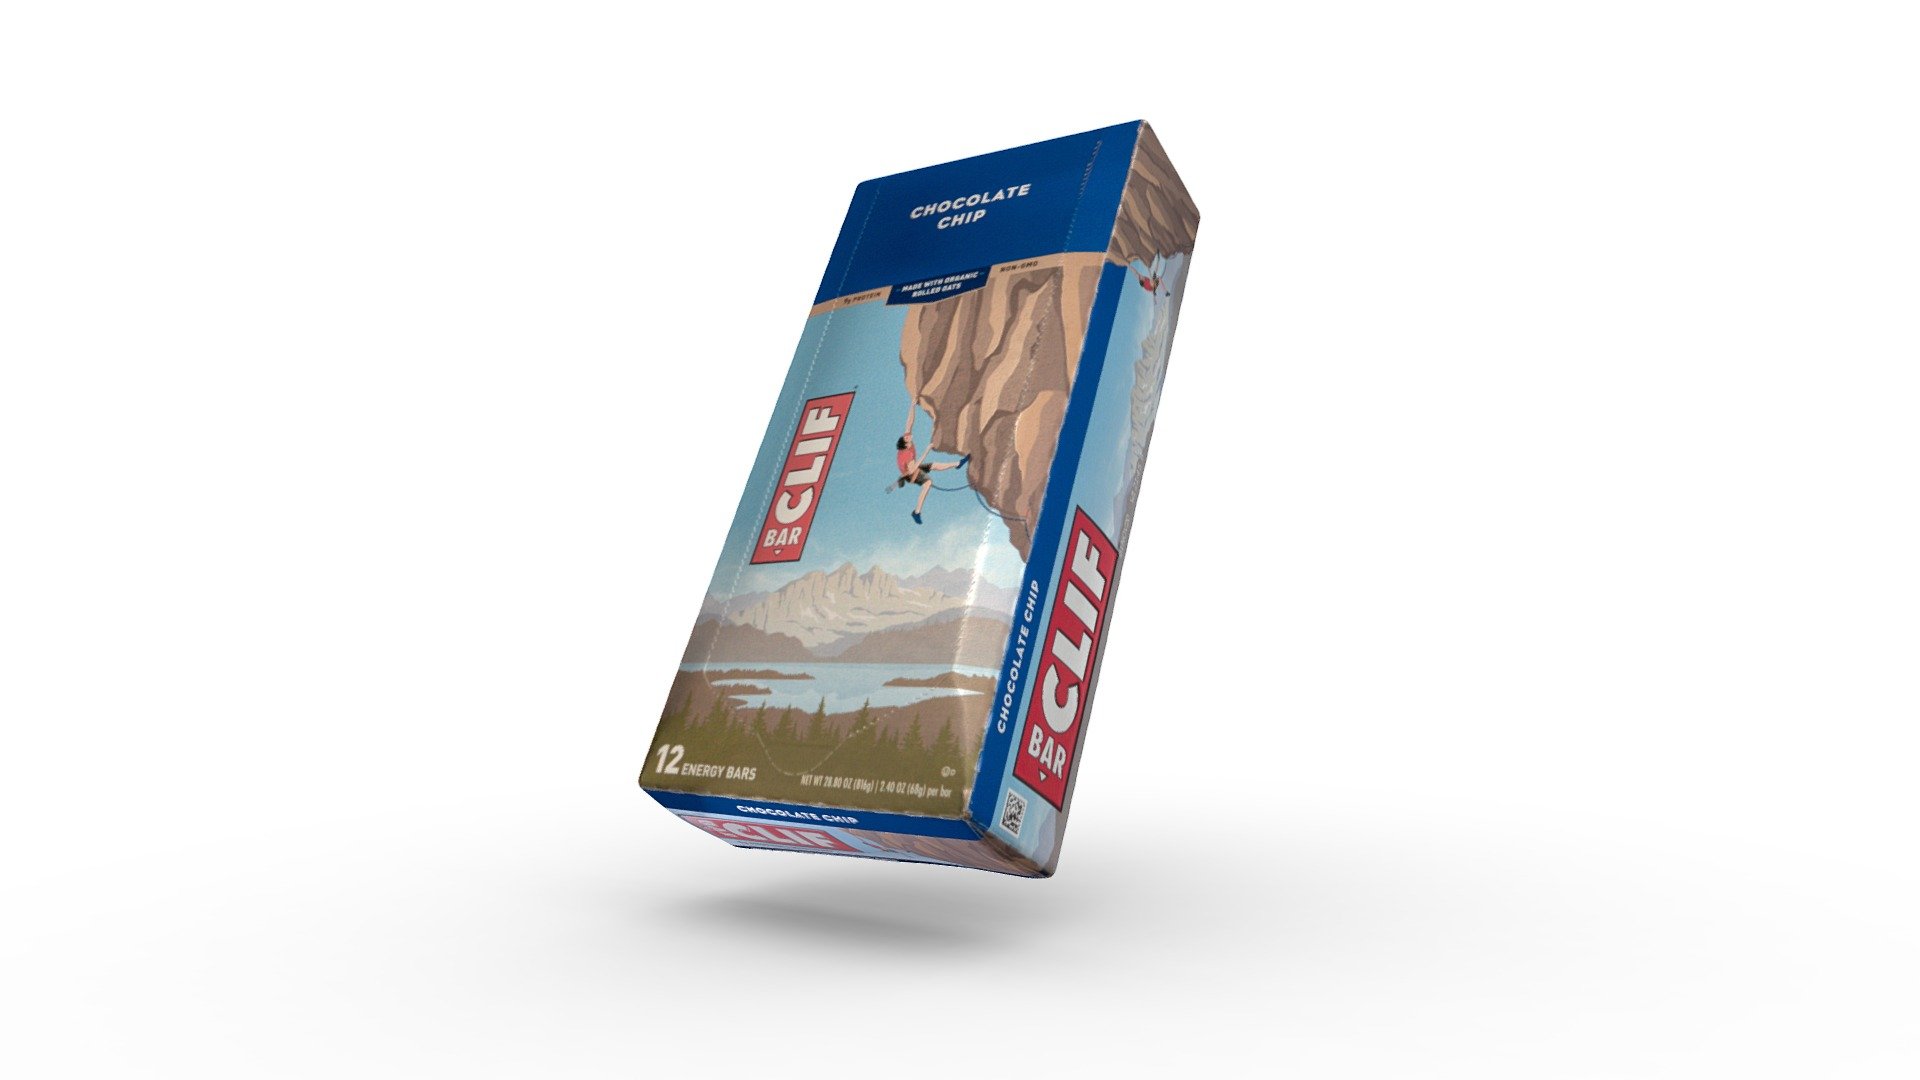 3D Scan of a 12 Pack of Chocolate Chip CLIF BARs

Maintaining your place on top of the world takes a ton of energy. Made with organic rolled oats and chocolate chips, this flavor brings to mind fresh, warm chocolate chip cookies straight from the oven. Non-GMO and made with 9 grams of protein, this delicious energy bar helps provide the nutrition you need for sustained energy 3d model